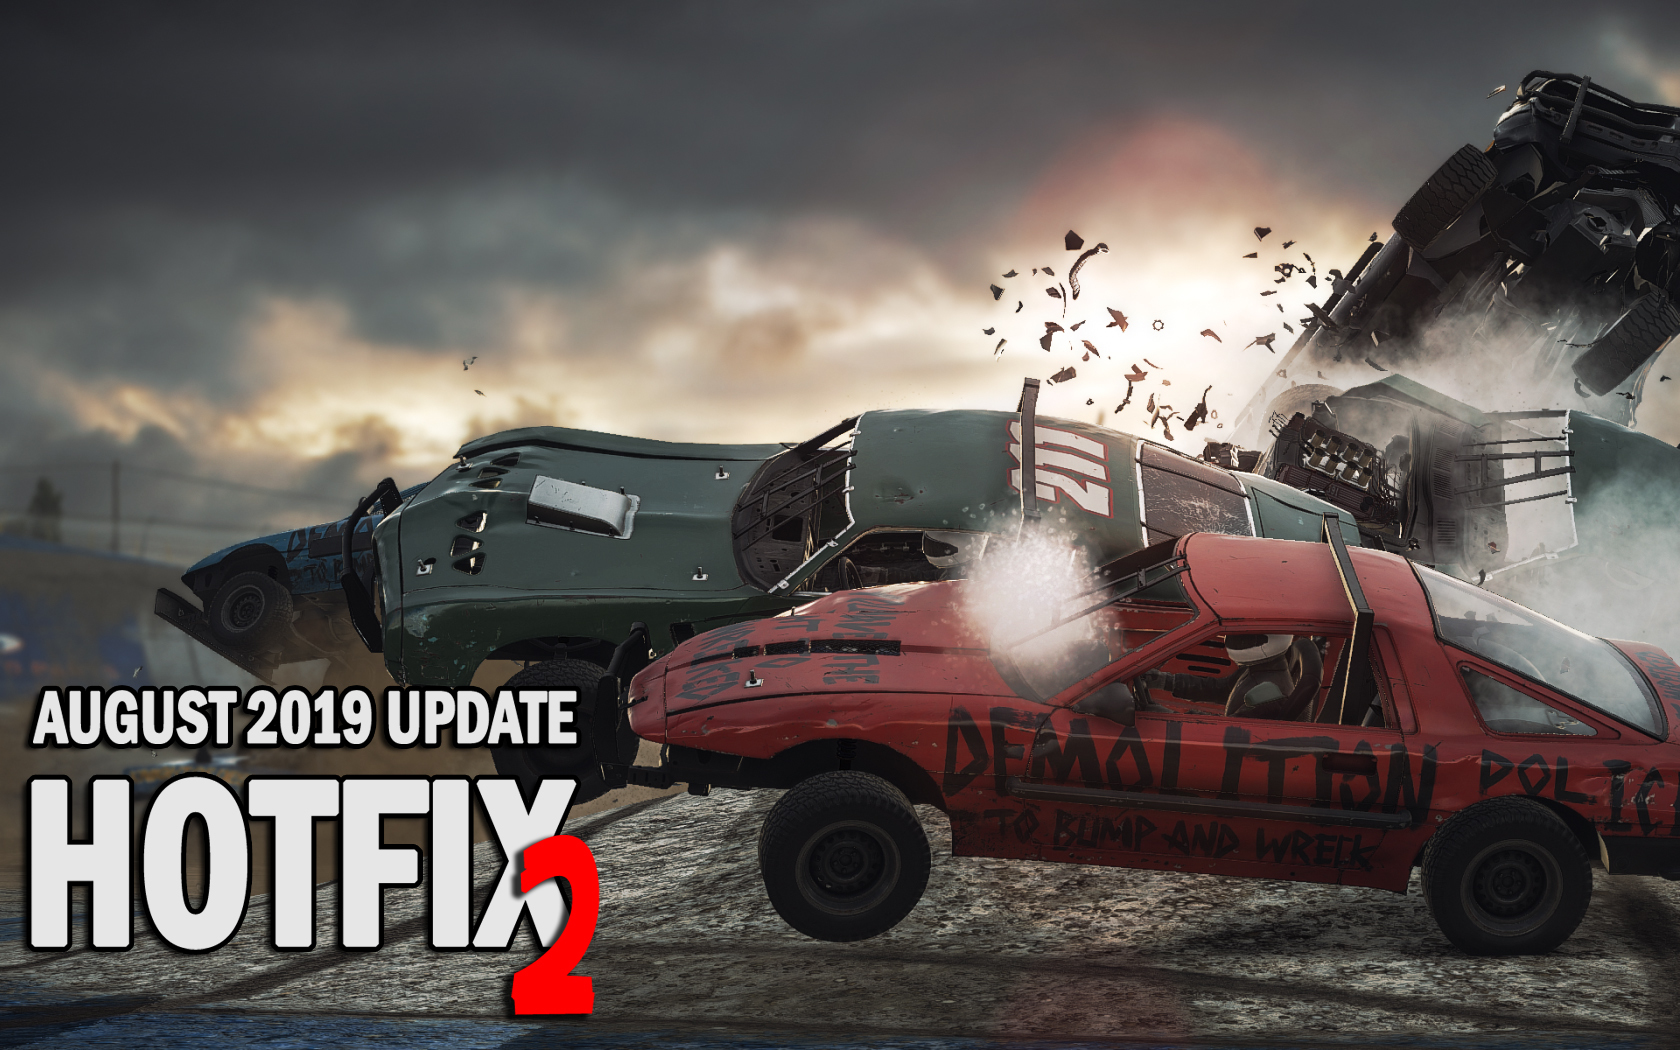 Hotfix 2 Released reviews